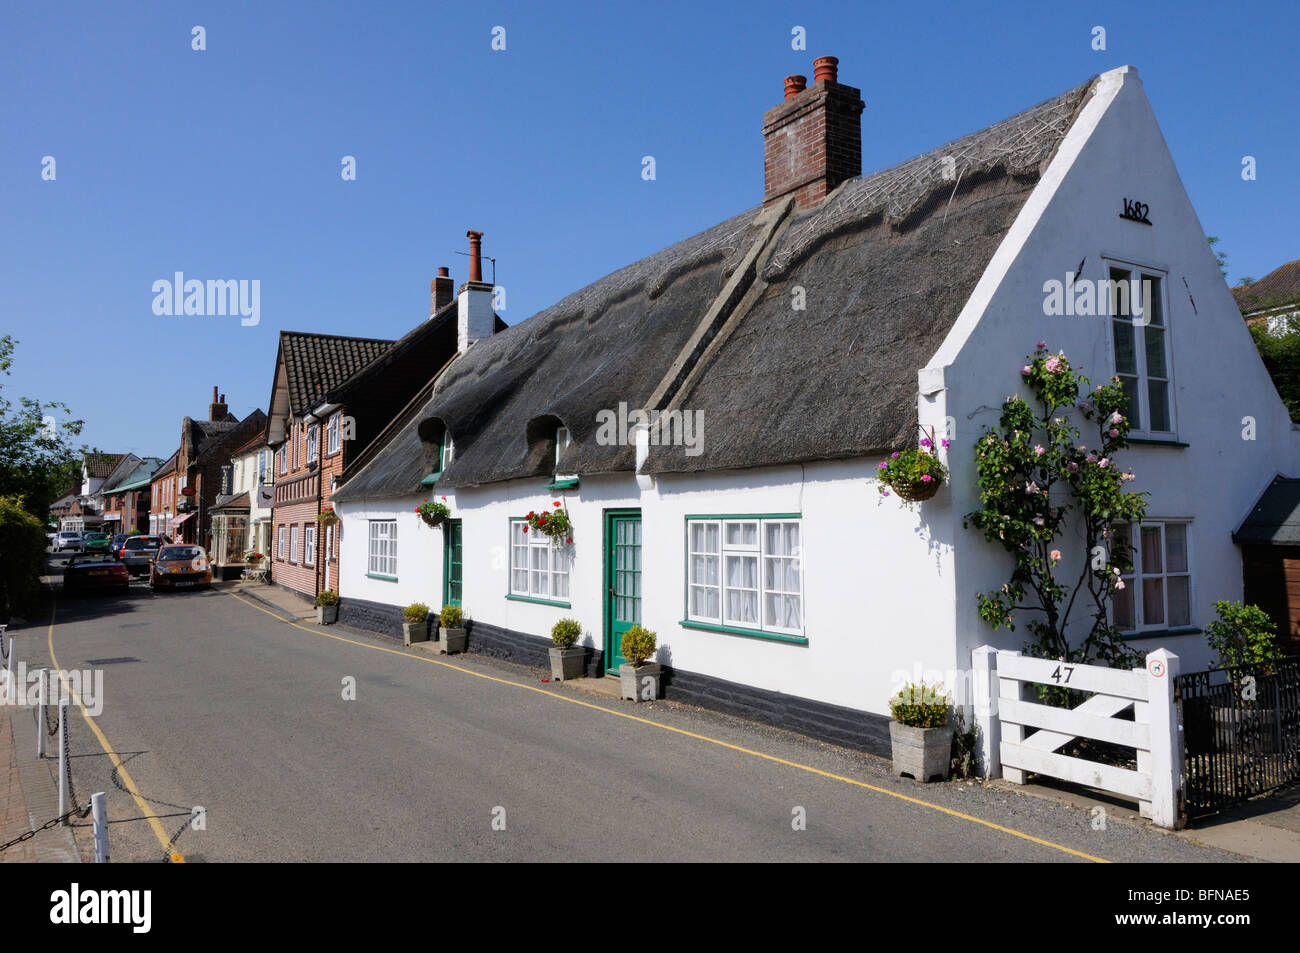 Thatched cottages along Lower Street, Horning, Norfolk Broads, England, UK. Stock Photo